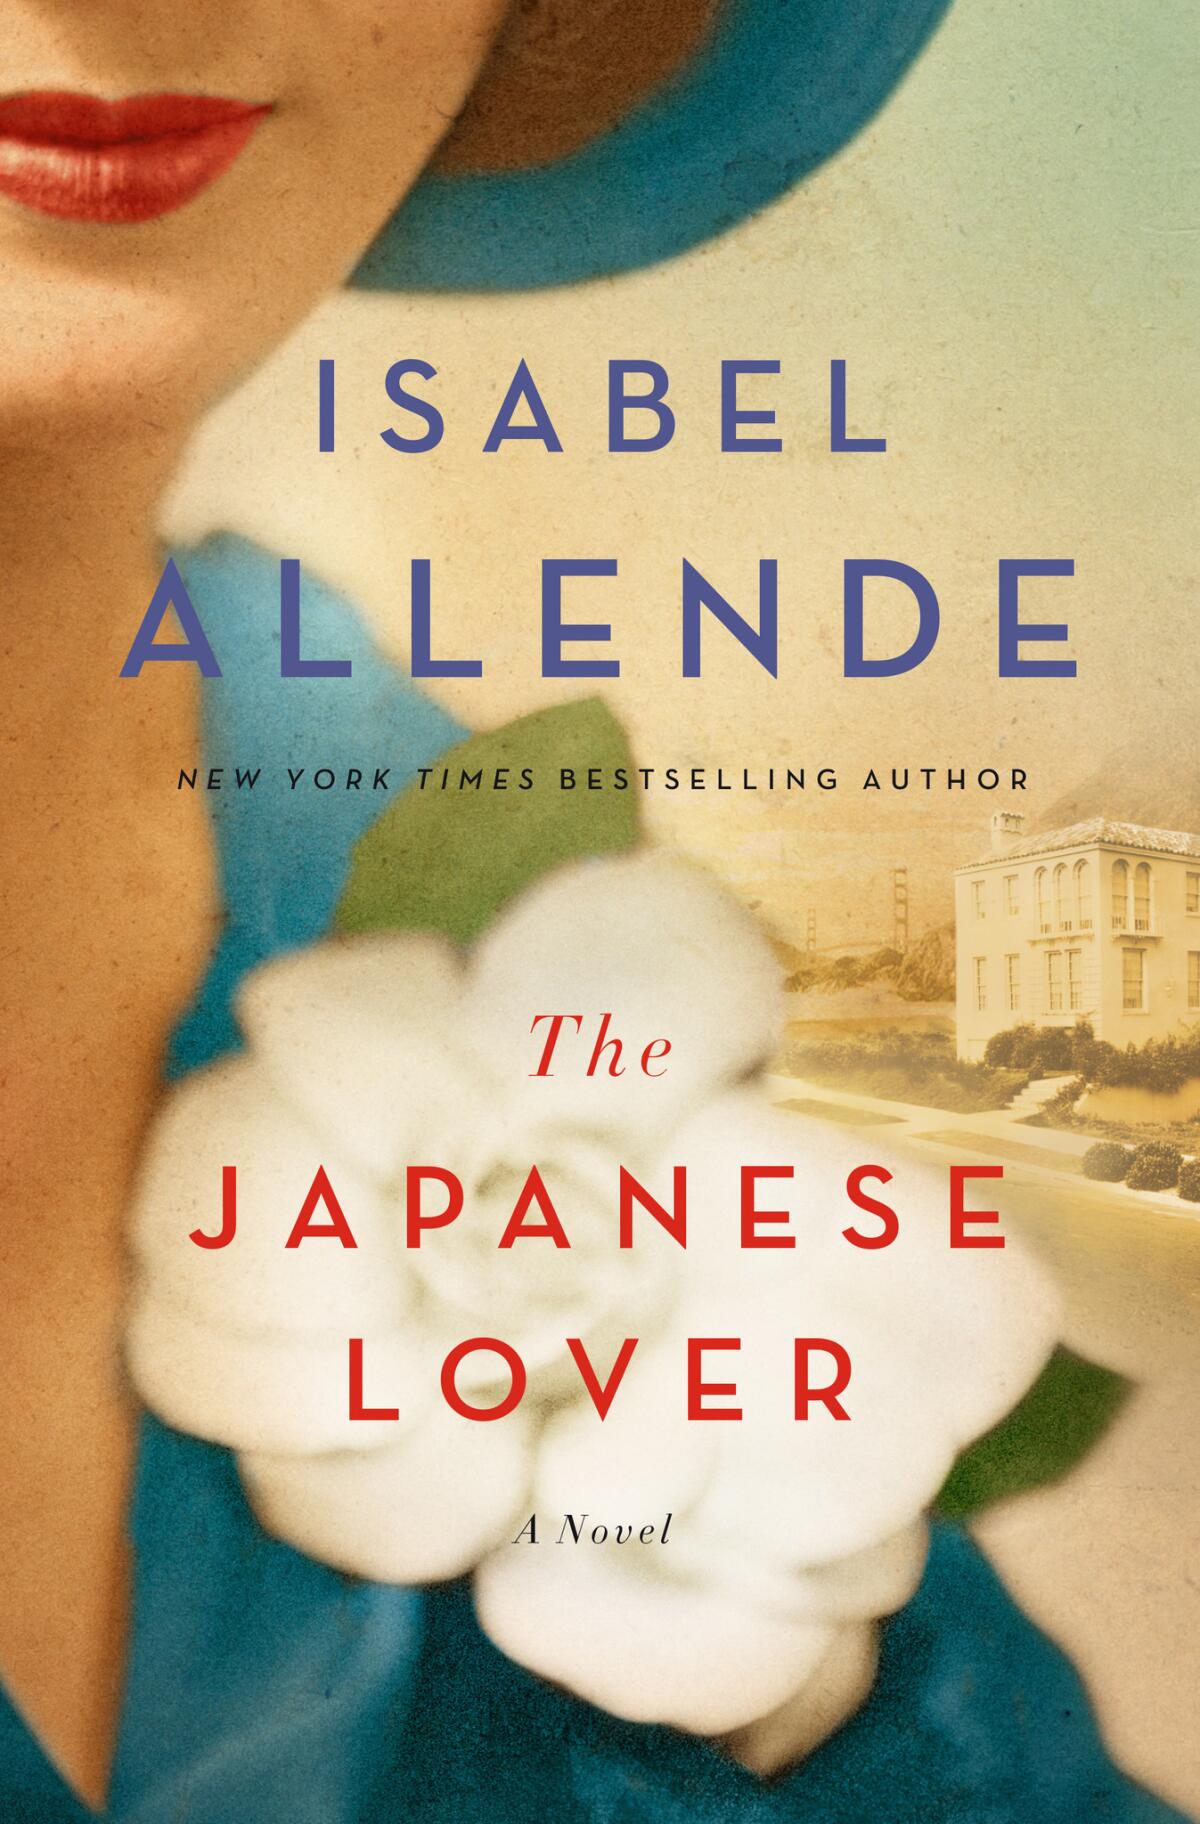 "The Japanese Lover" by Isabel Allende